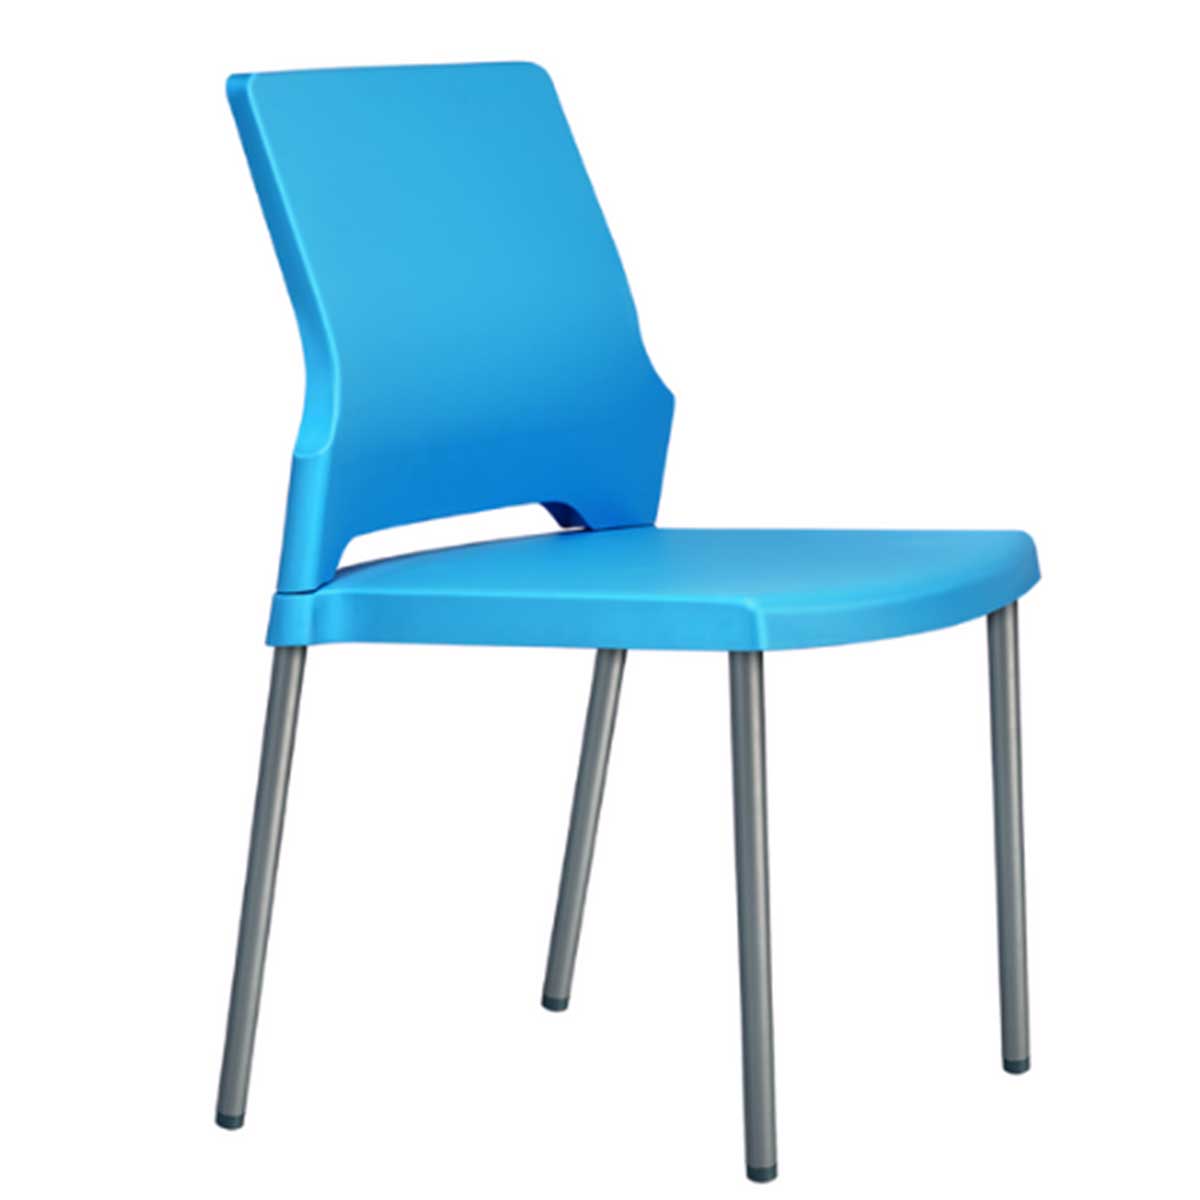 Cafeteria Chair Manufacturers, Suppliers in Mohan Nagar